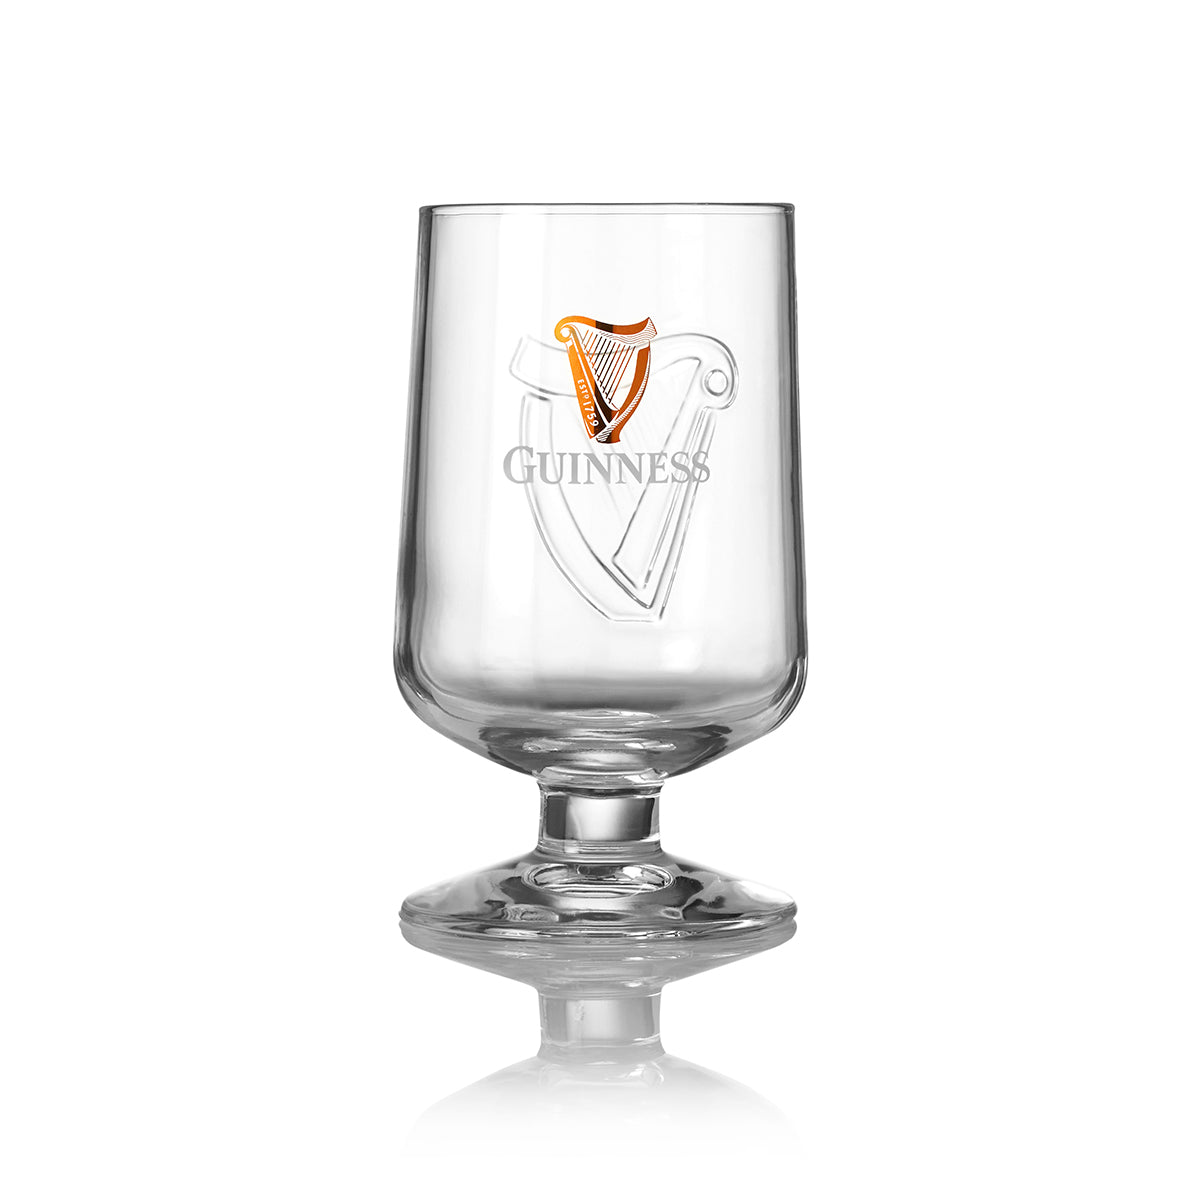 An Guinness Embossed Stem Glass 420ml - 24 Pack on a white background.